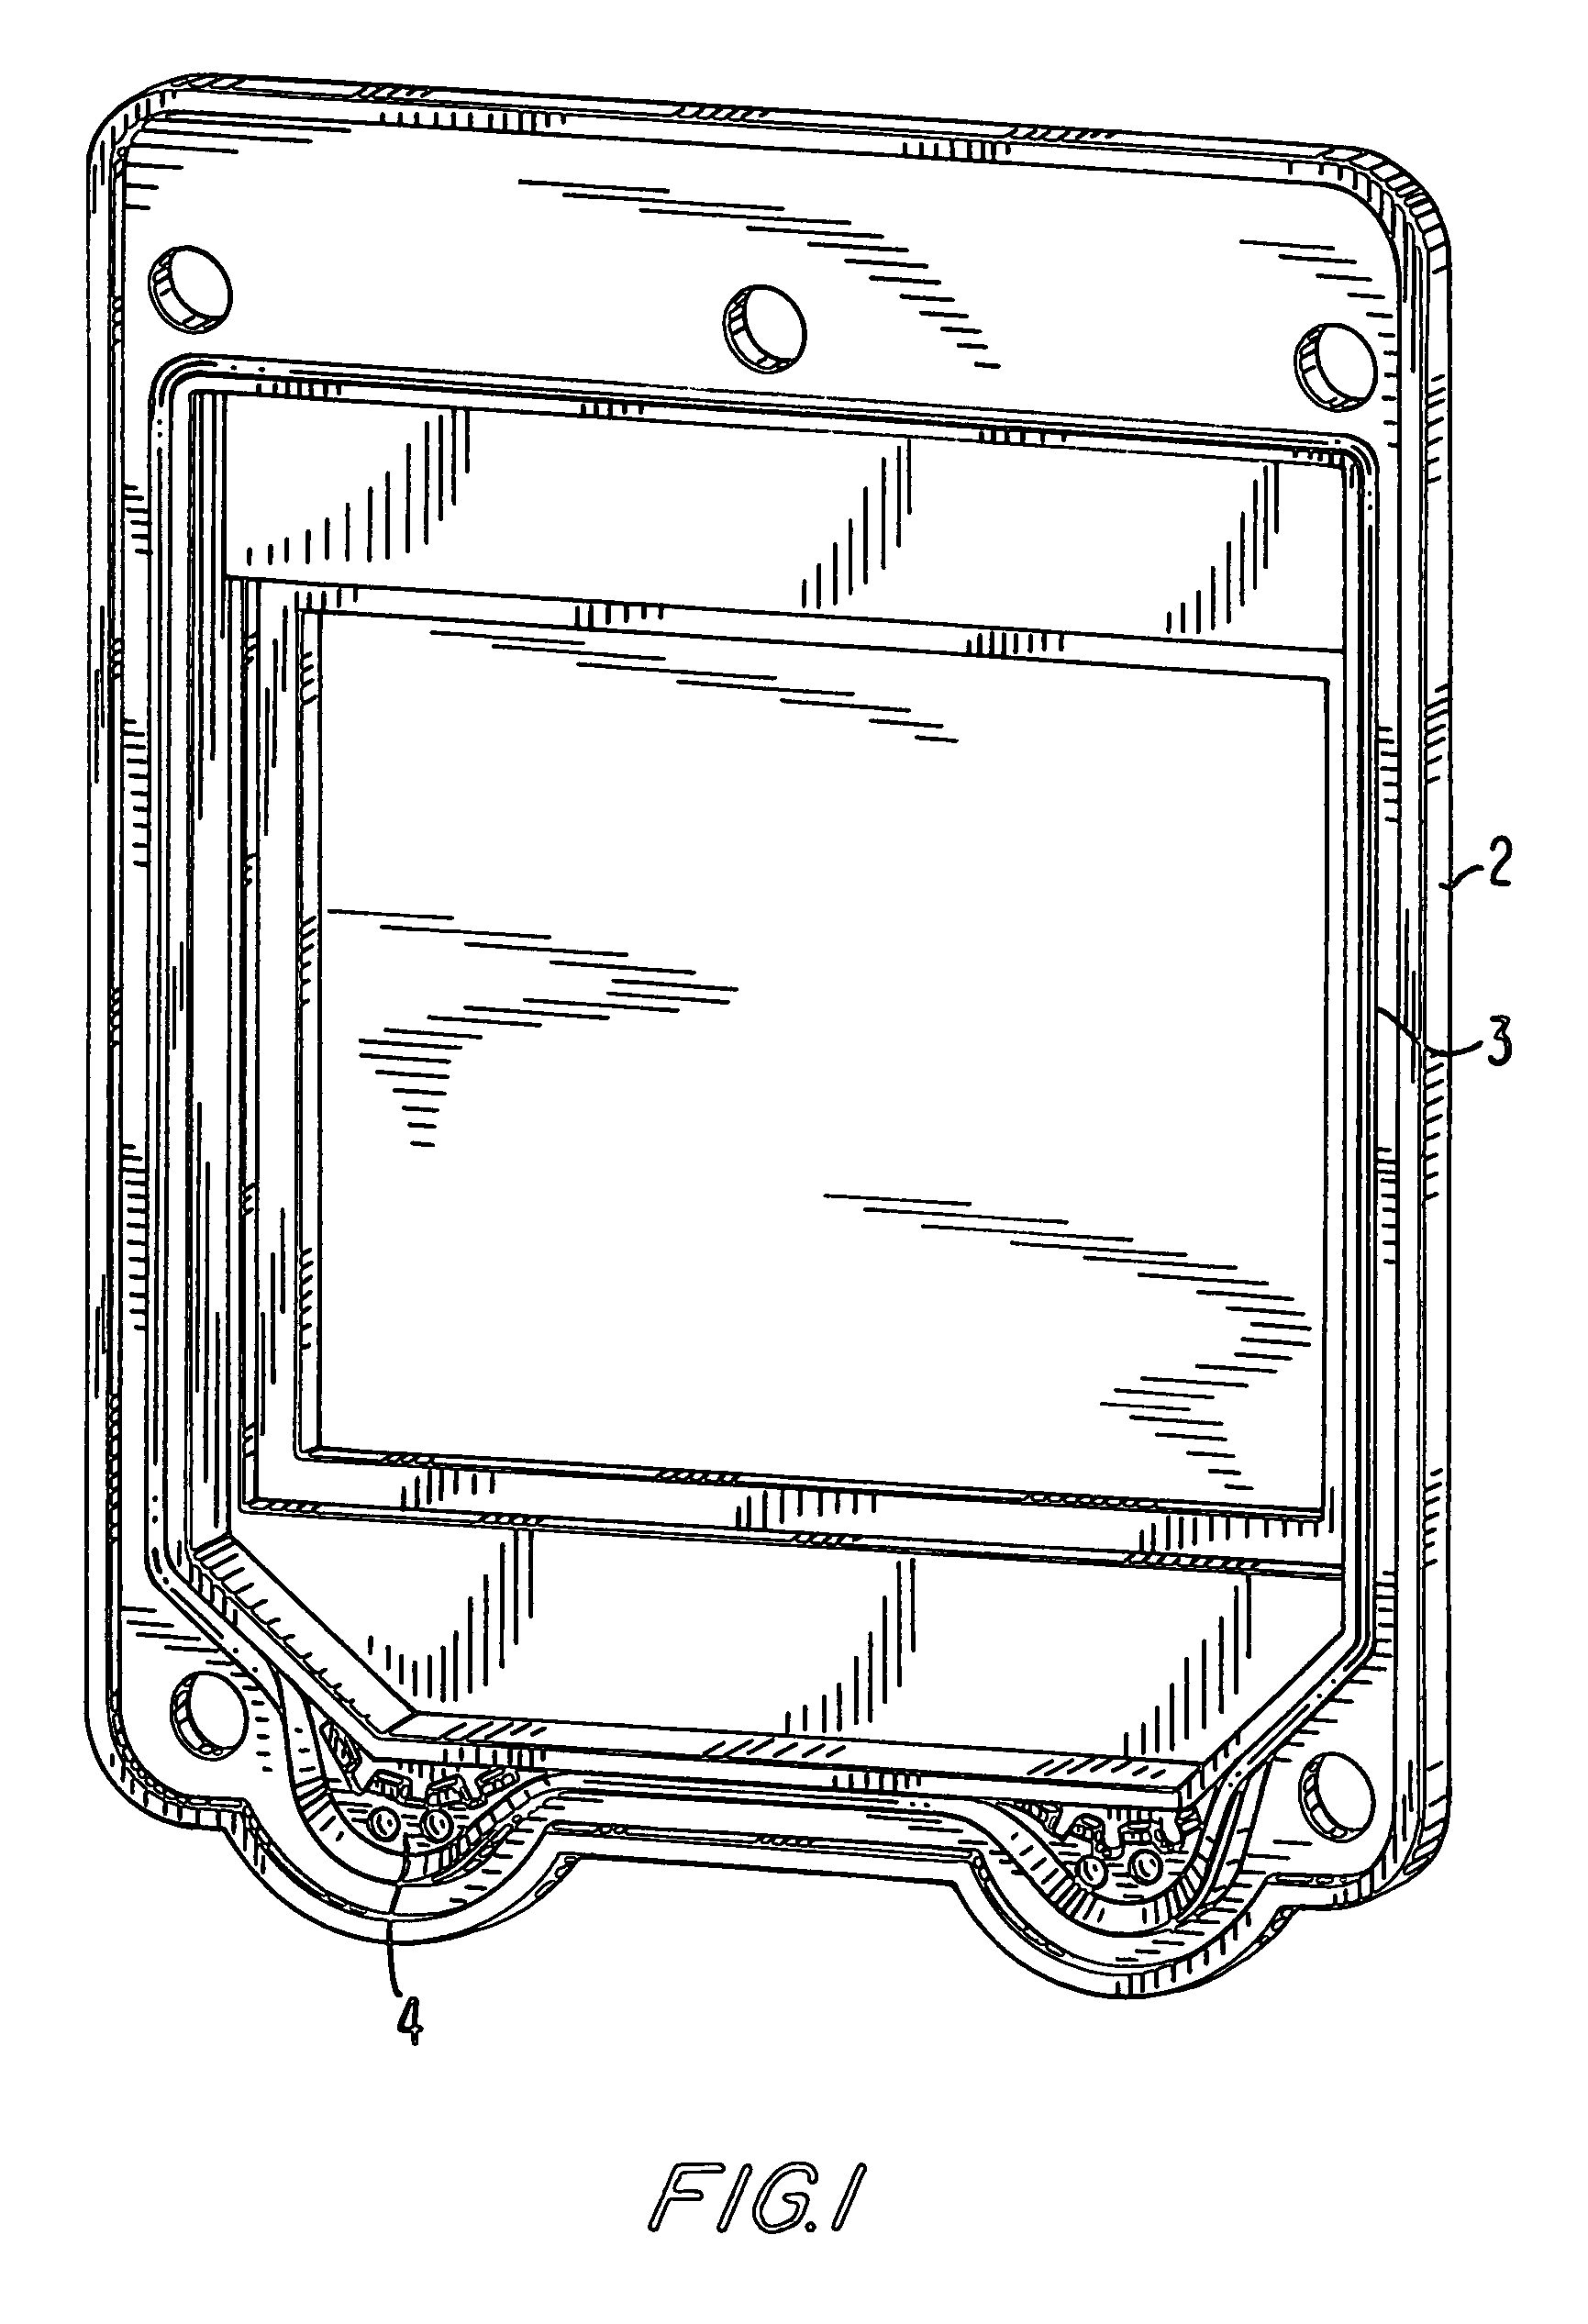 Housing for an electronic or mechtronic unit including seal with pressure relief device